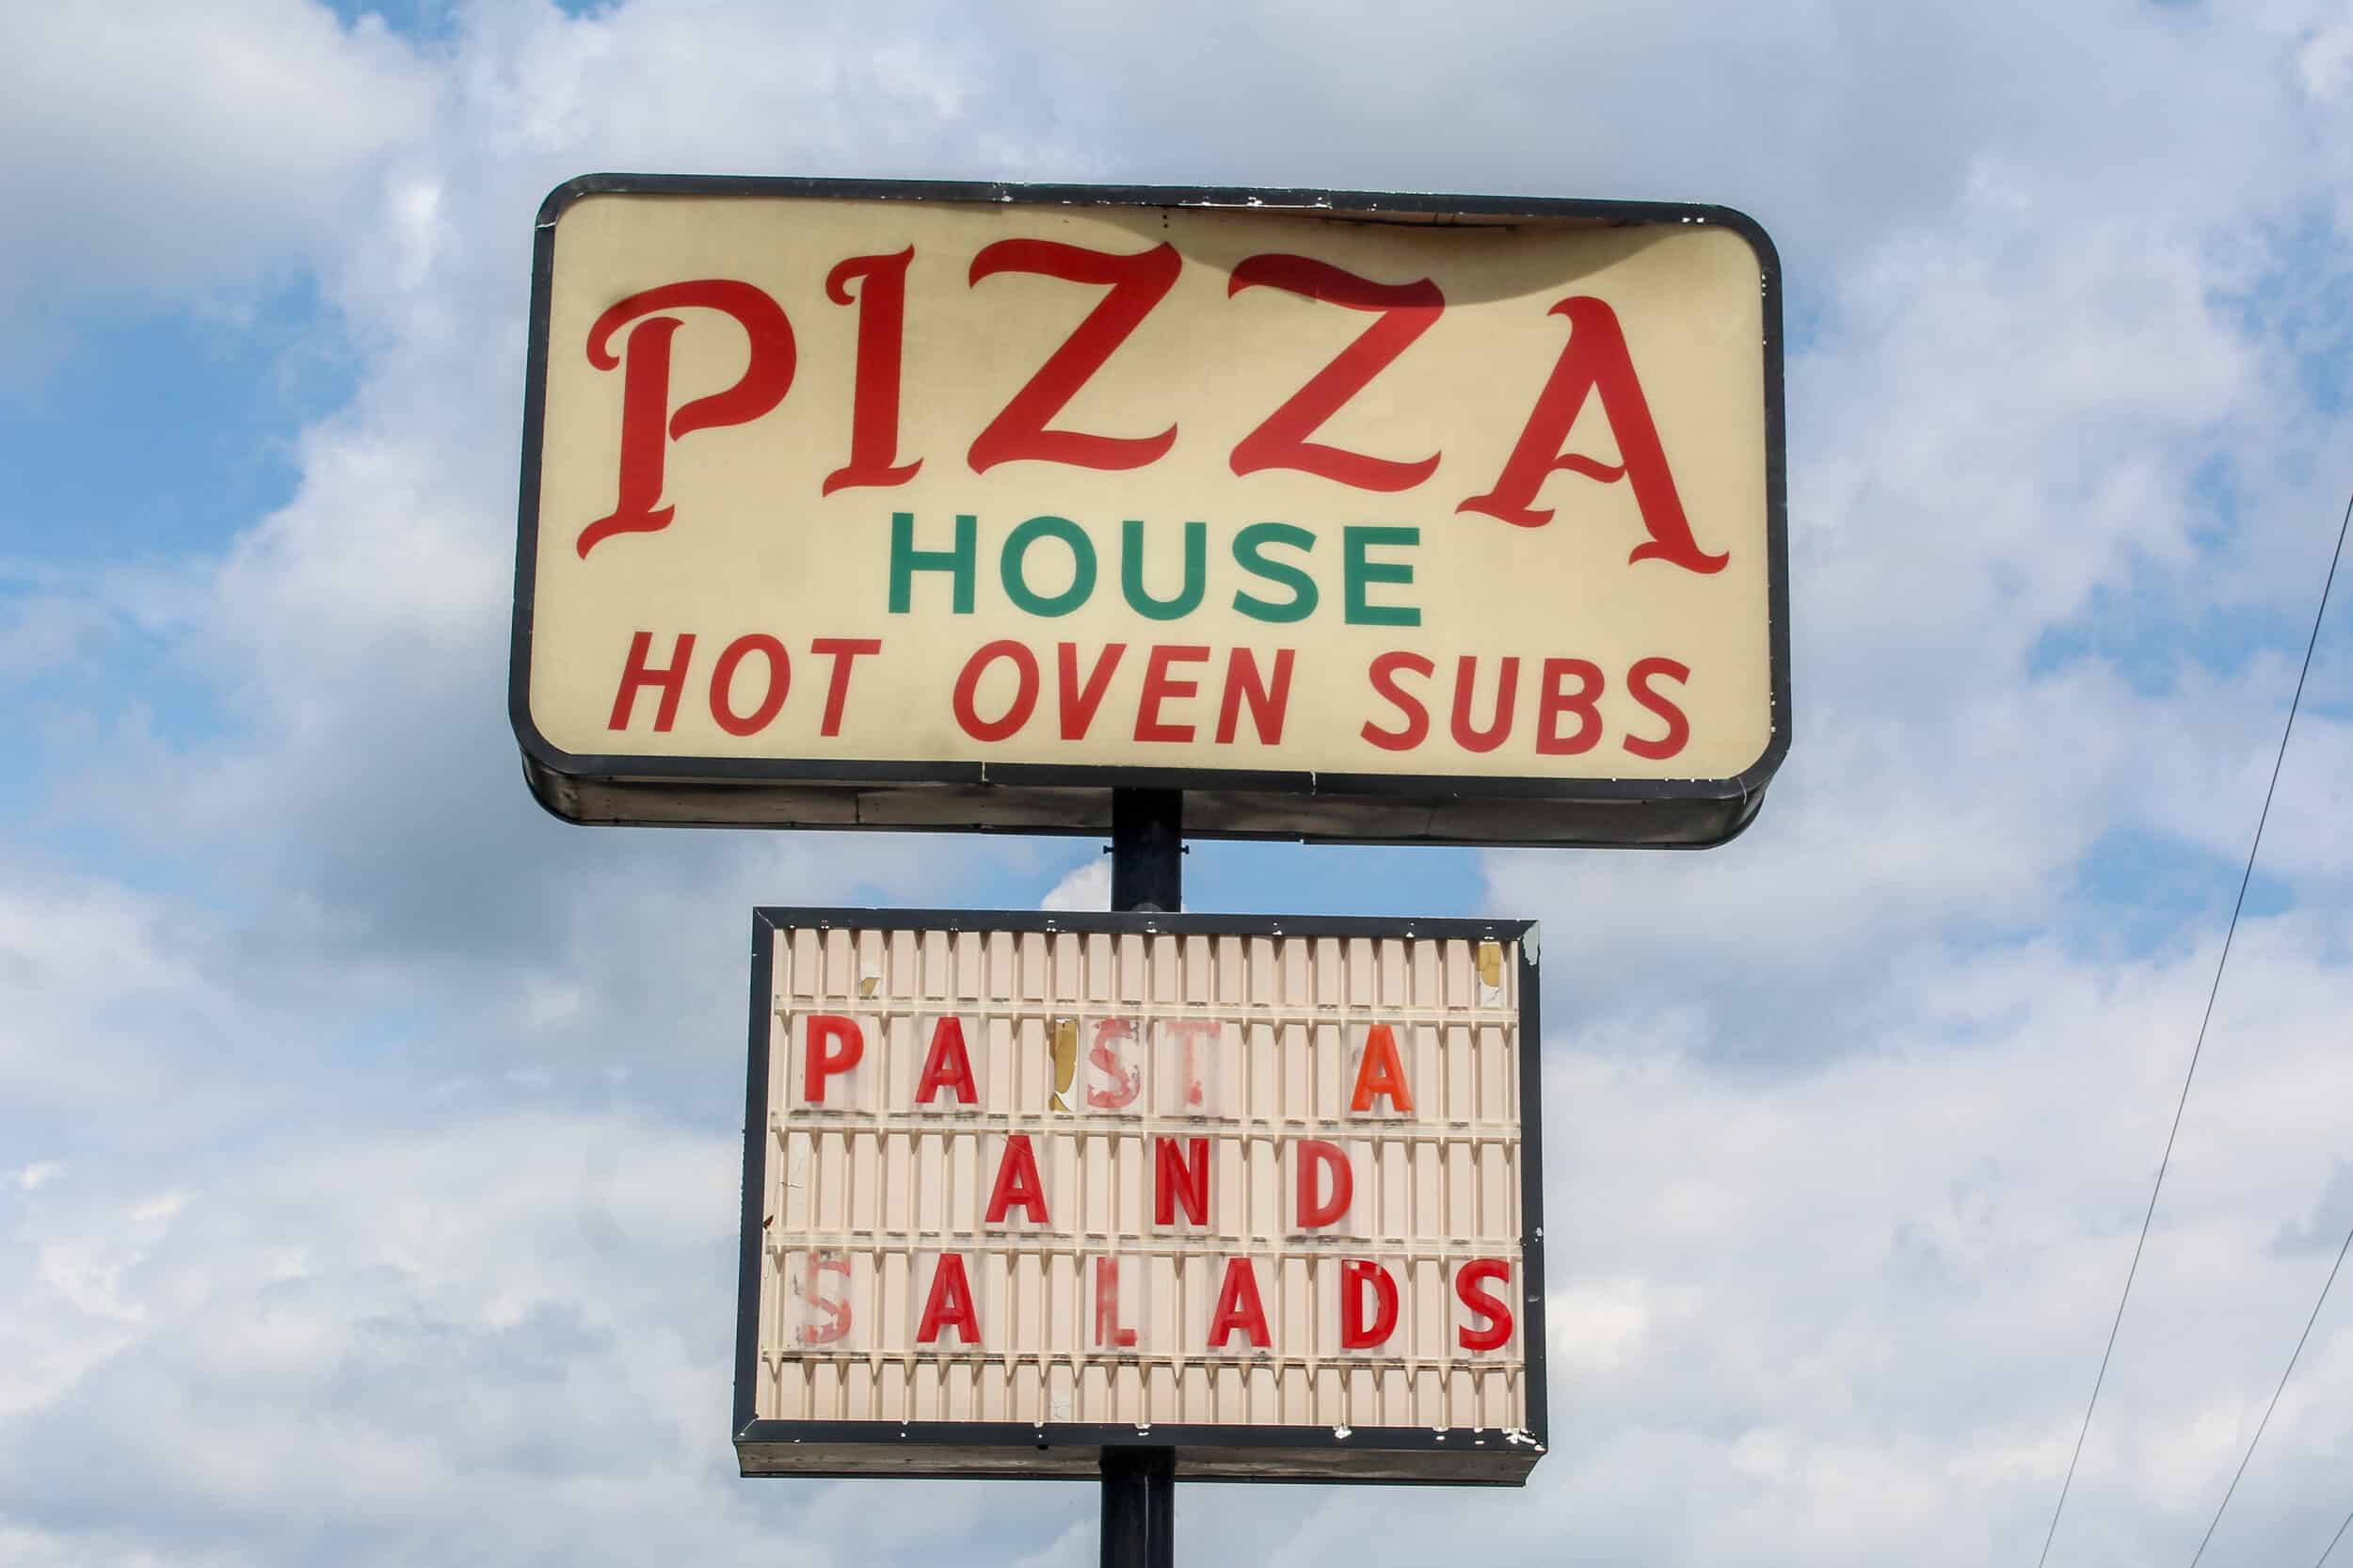 Right off of Highway 25 in Travelers Rest is Pizza house.